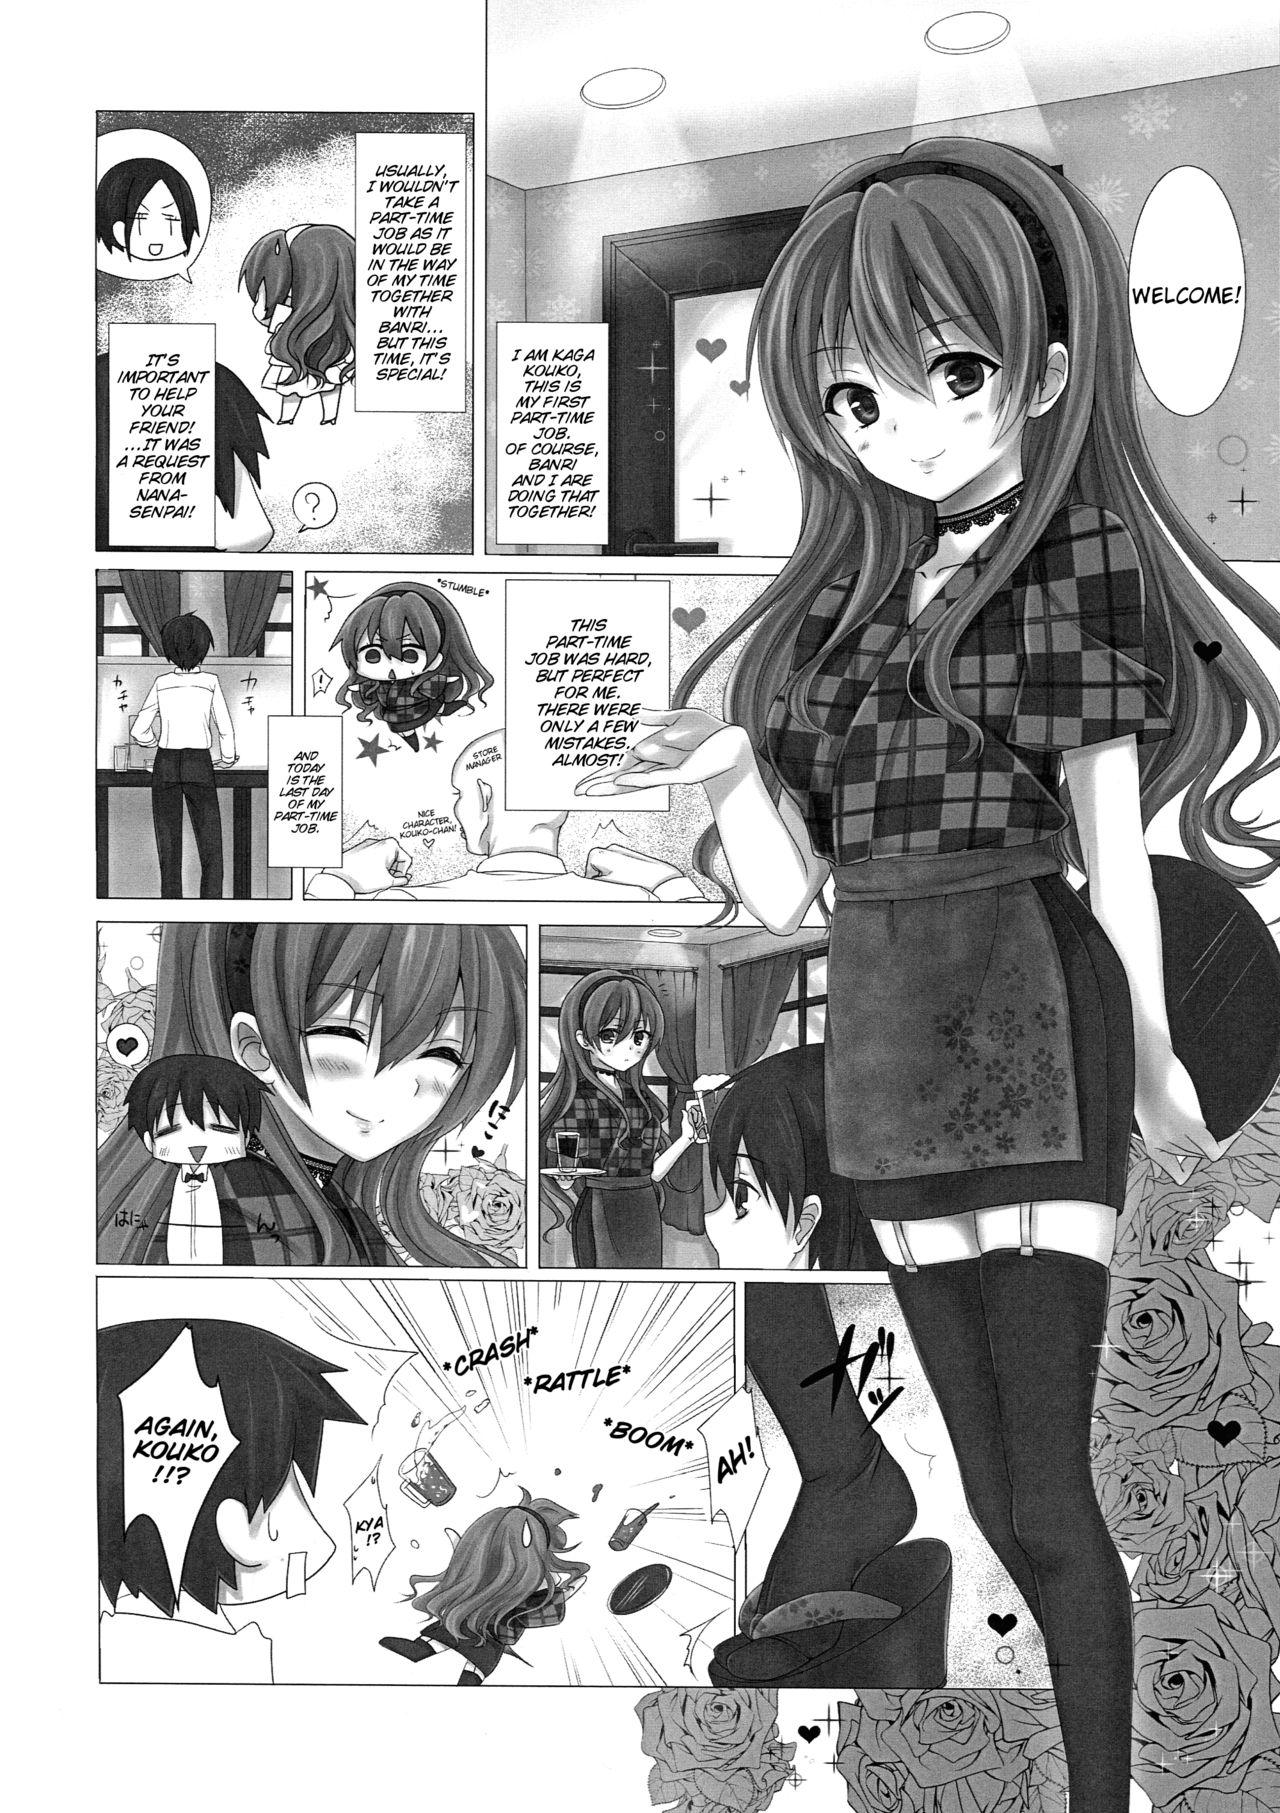 Naturaltits KISS ME TOUCH ME - Golden time Babe - Page 3